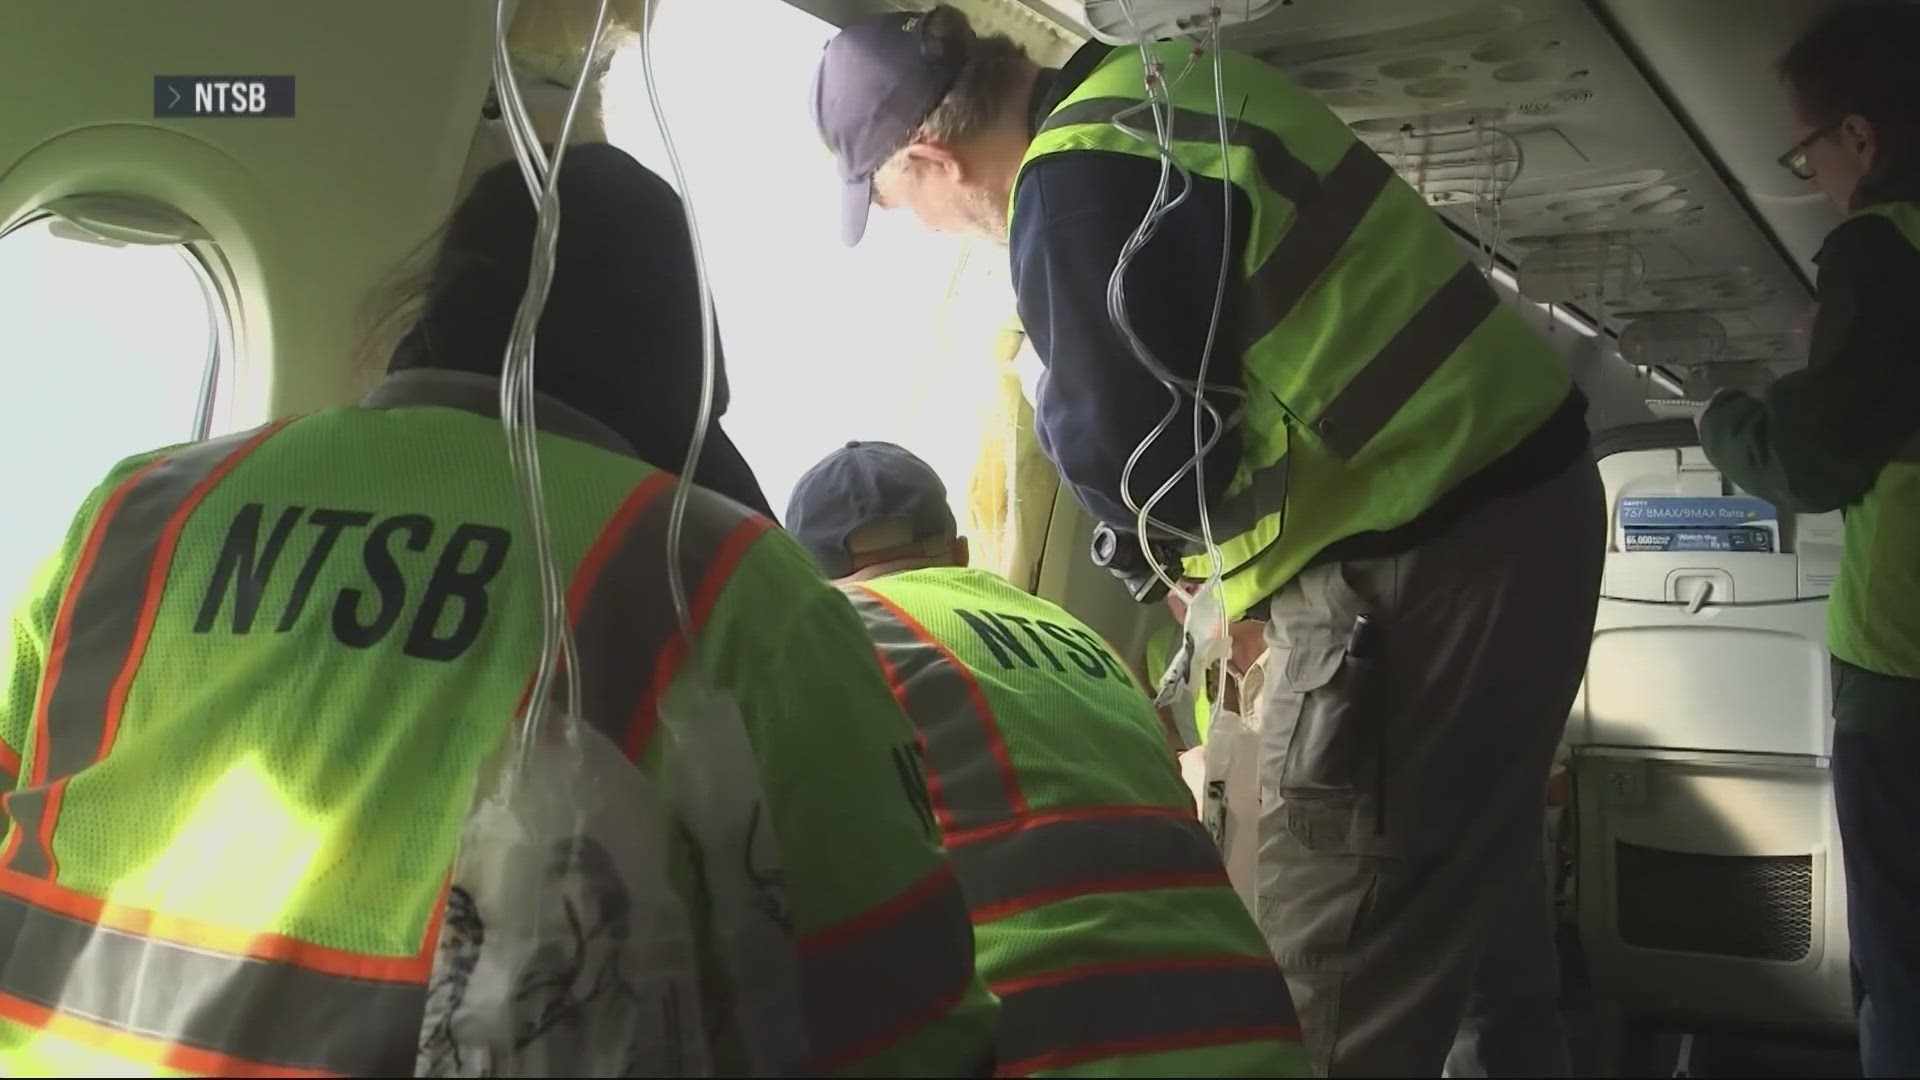 NTSB report determined that the bolts were missing from the door that blew out mid-air on an Alaska Airlines flight in January.